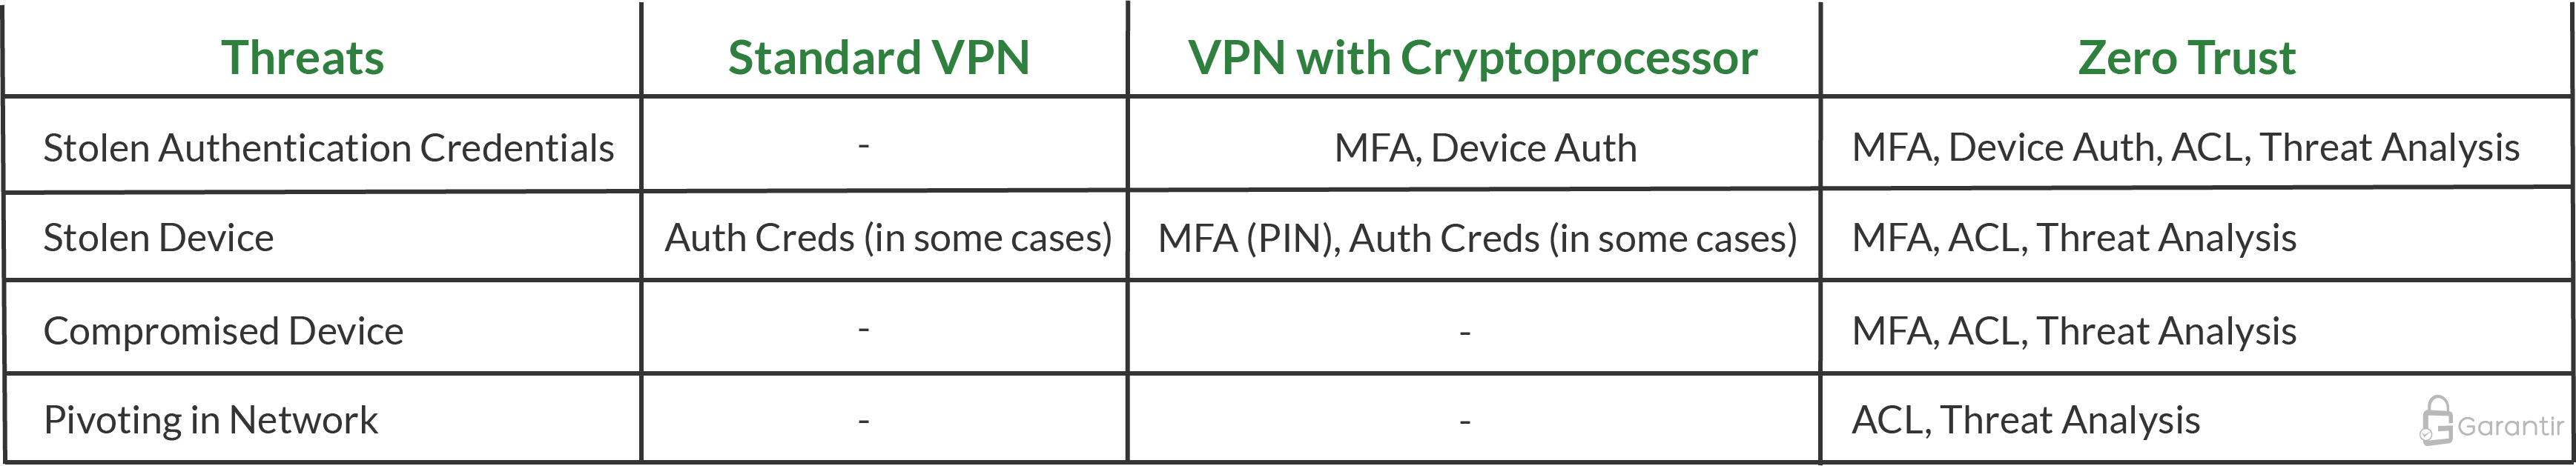 A table comparing the defenses of a standard VPN configuration with the defenses of a VPN used with cryptoprocessors and the defenses of a zero trust architecture.